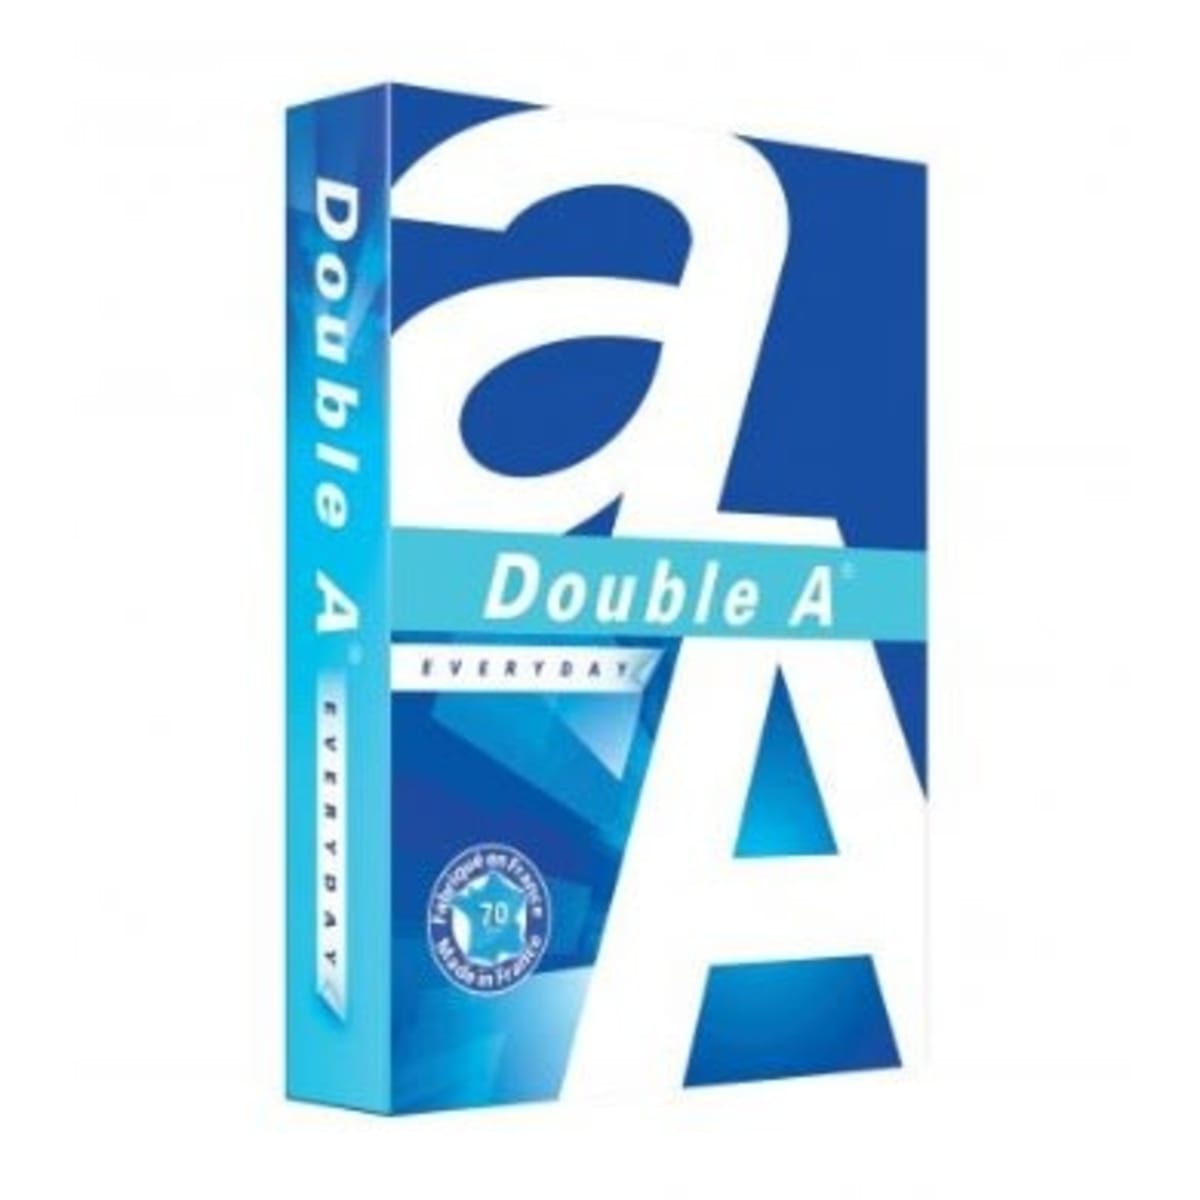 Double A A4 Printing Paper 75gsm - Box - StationeryCity Nigeria